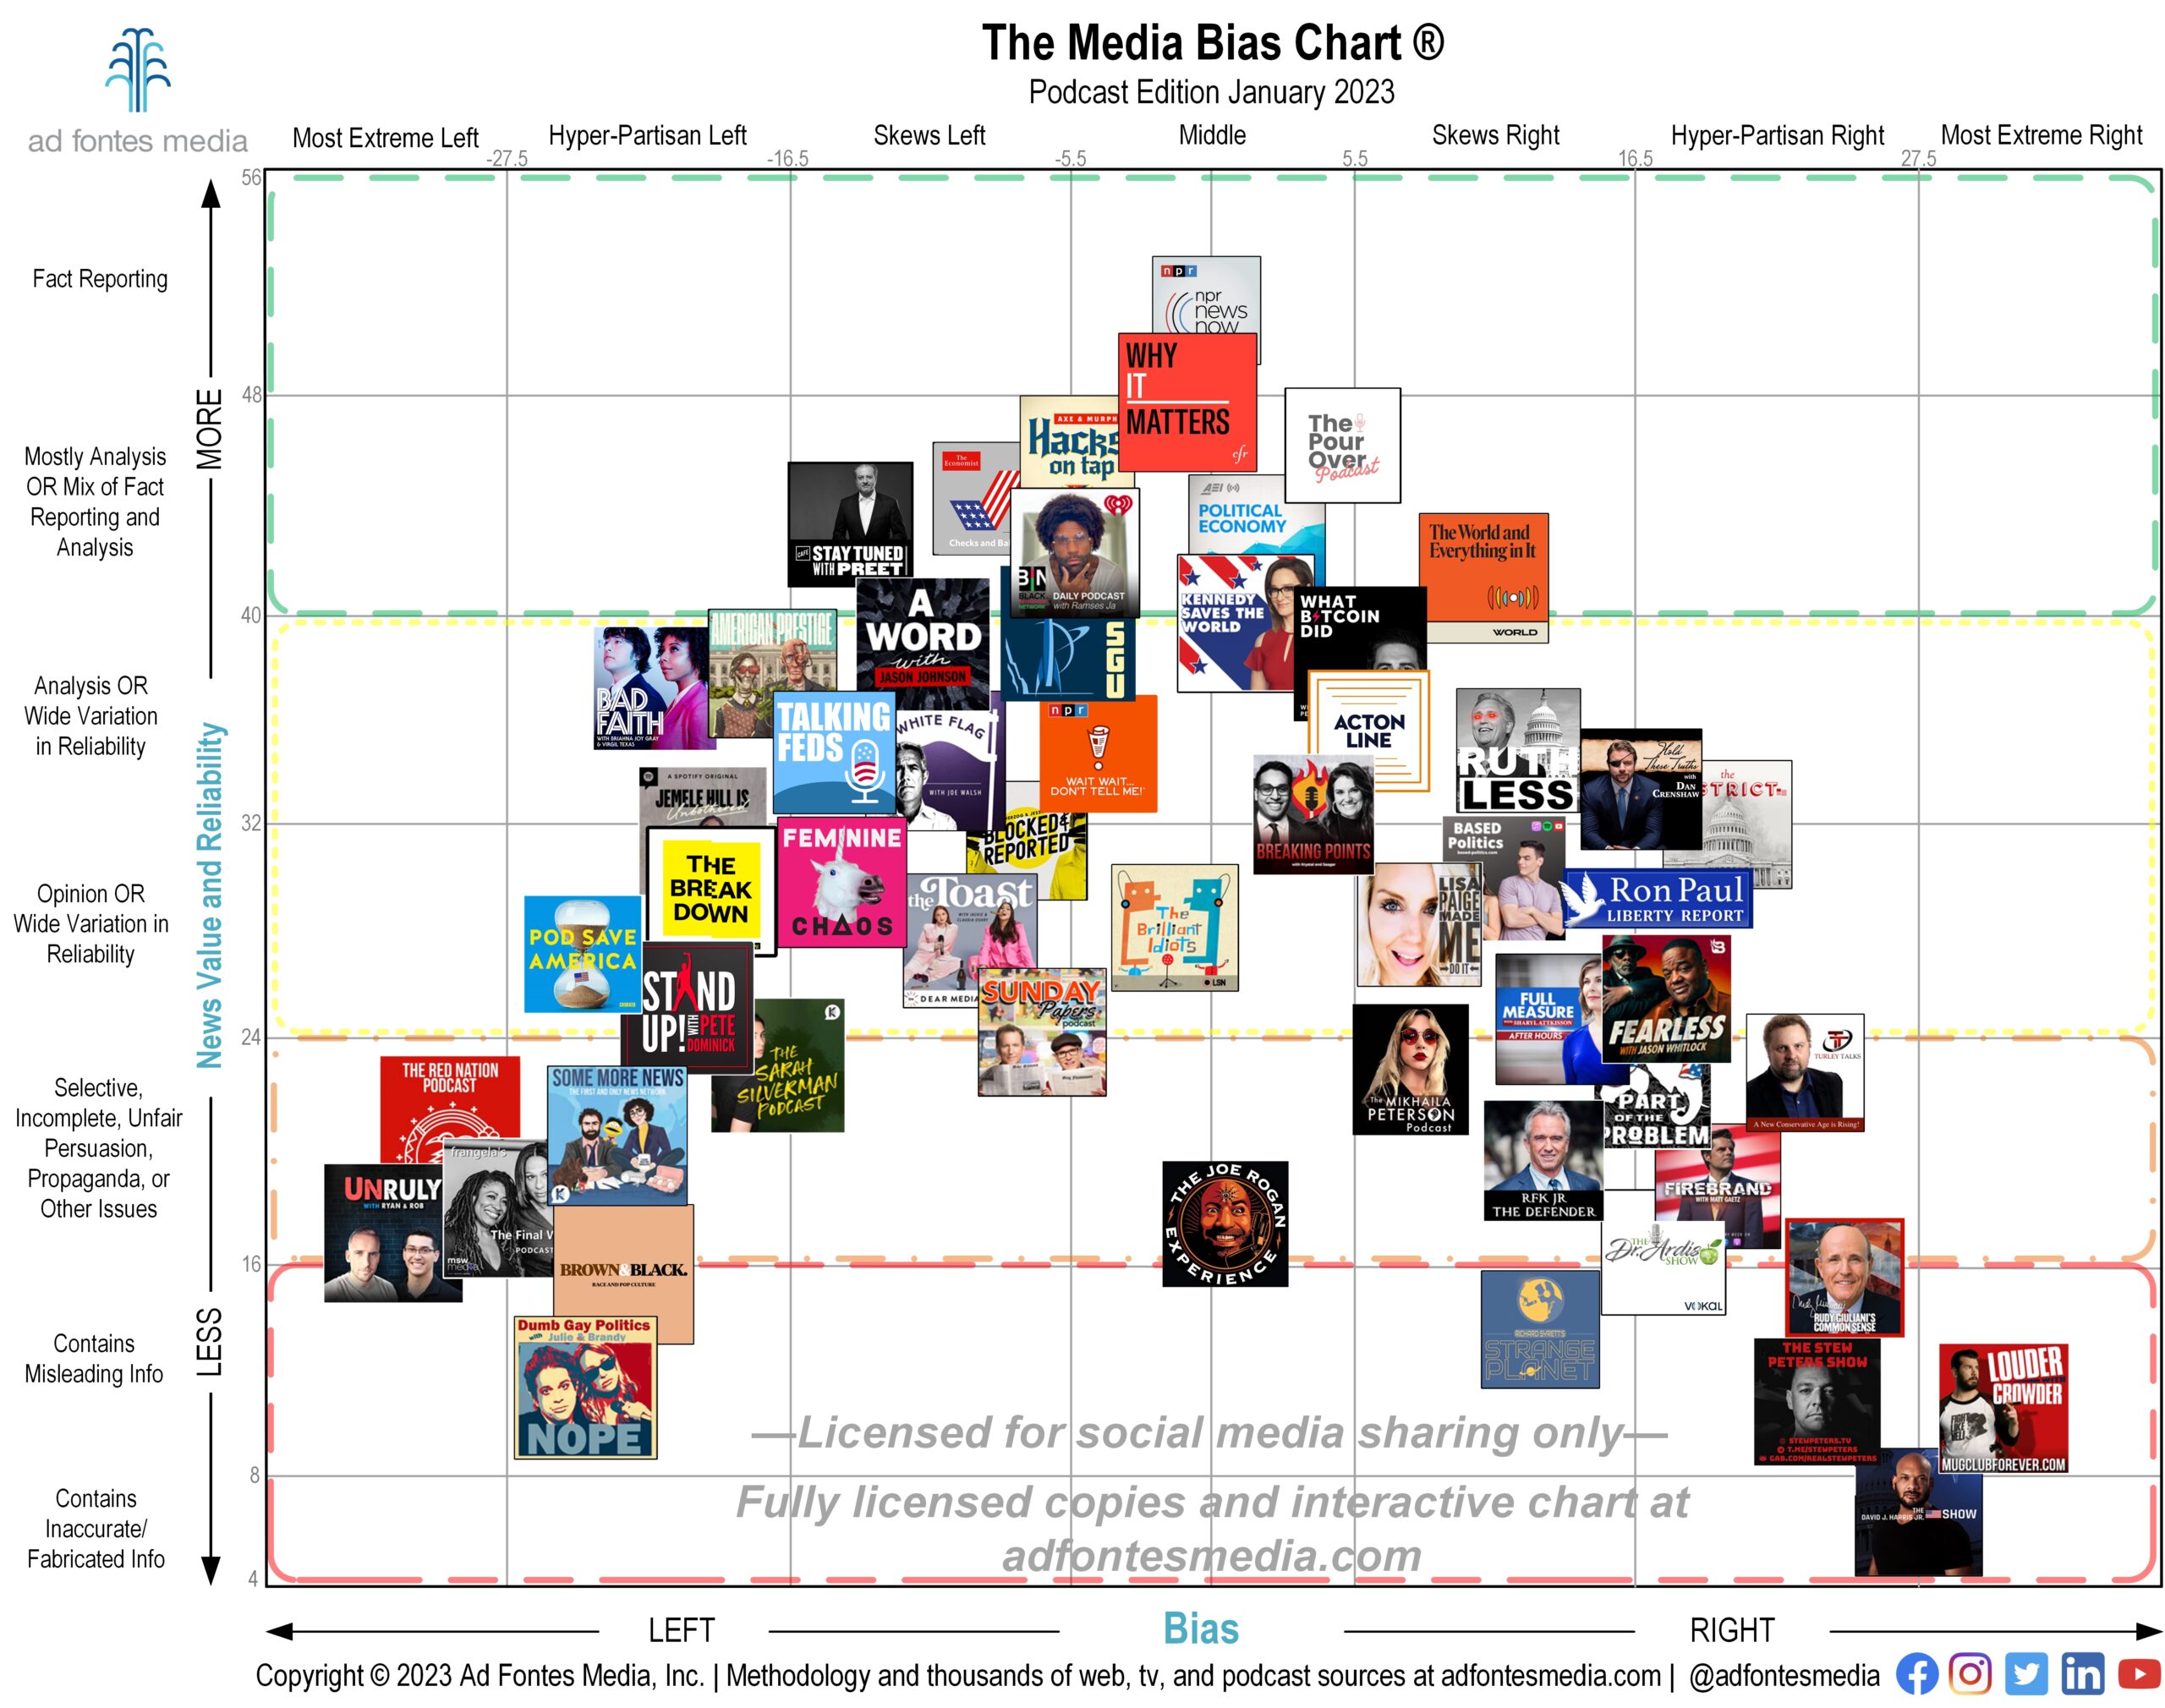 January 2023 podcast edition of the Media Bias Chart